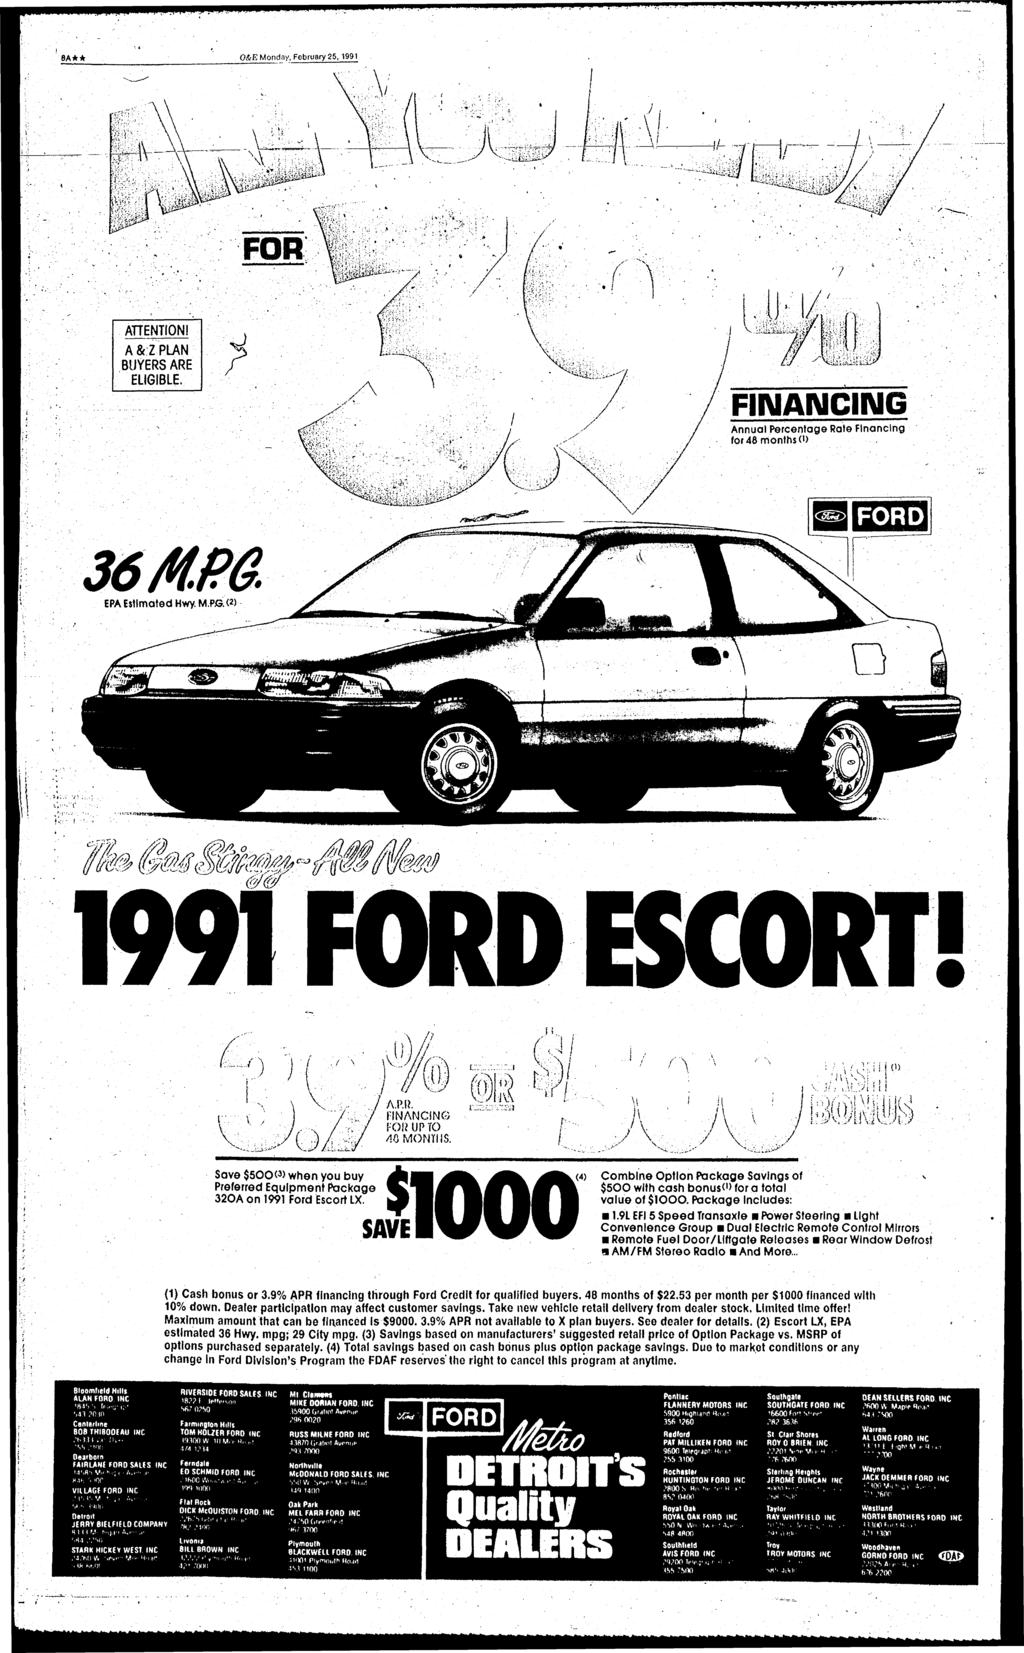 6A** O&E Monday, February 25, 1991 7 A[TENT!0N1 A&ZPLAN BUYERS ARE ELGBLE. < U mm &tg\m&v FNANCNG Annual Percentage Rate Fnancng for 48 months 0> FORD EPA Estmated Hwy M.PG.W --; V yv.